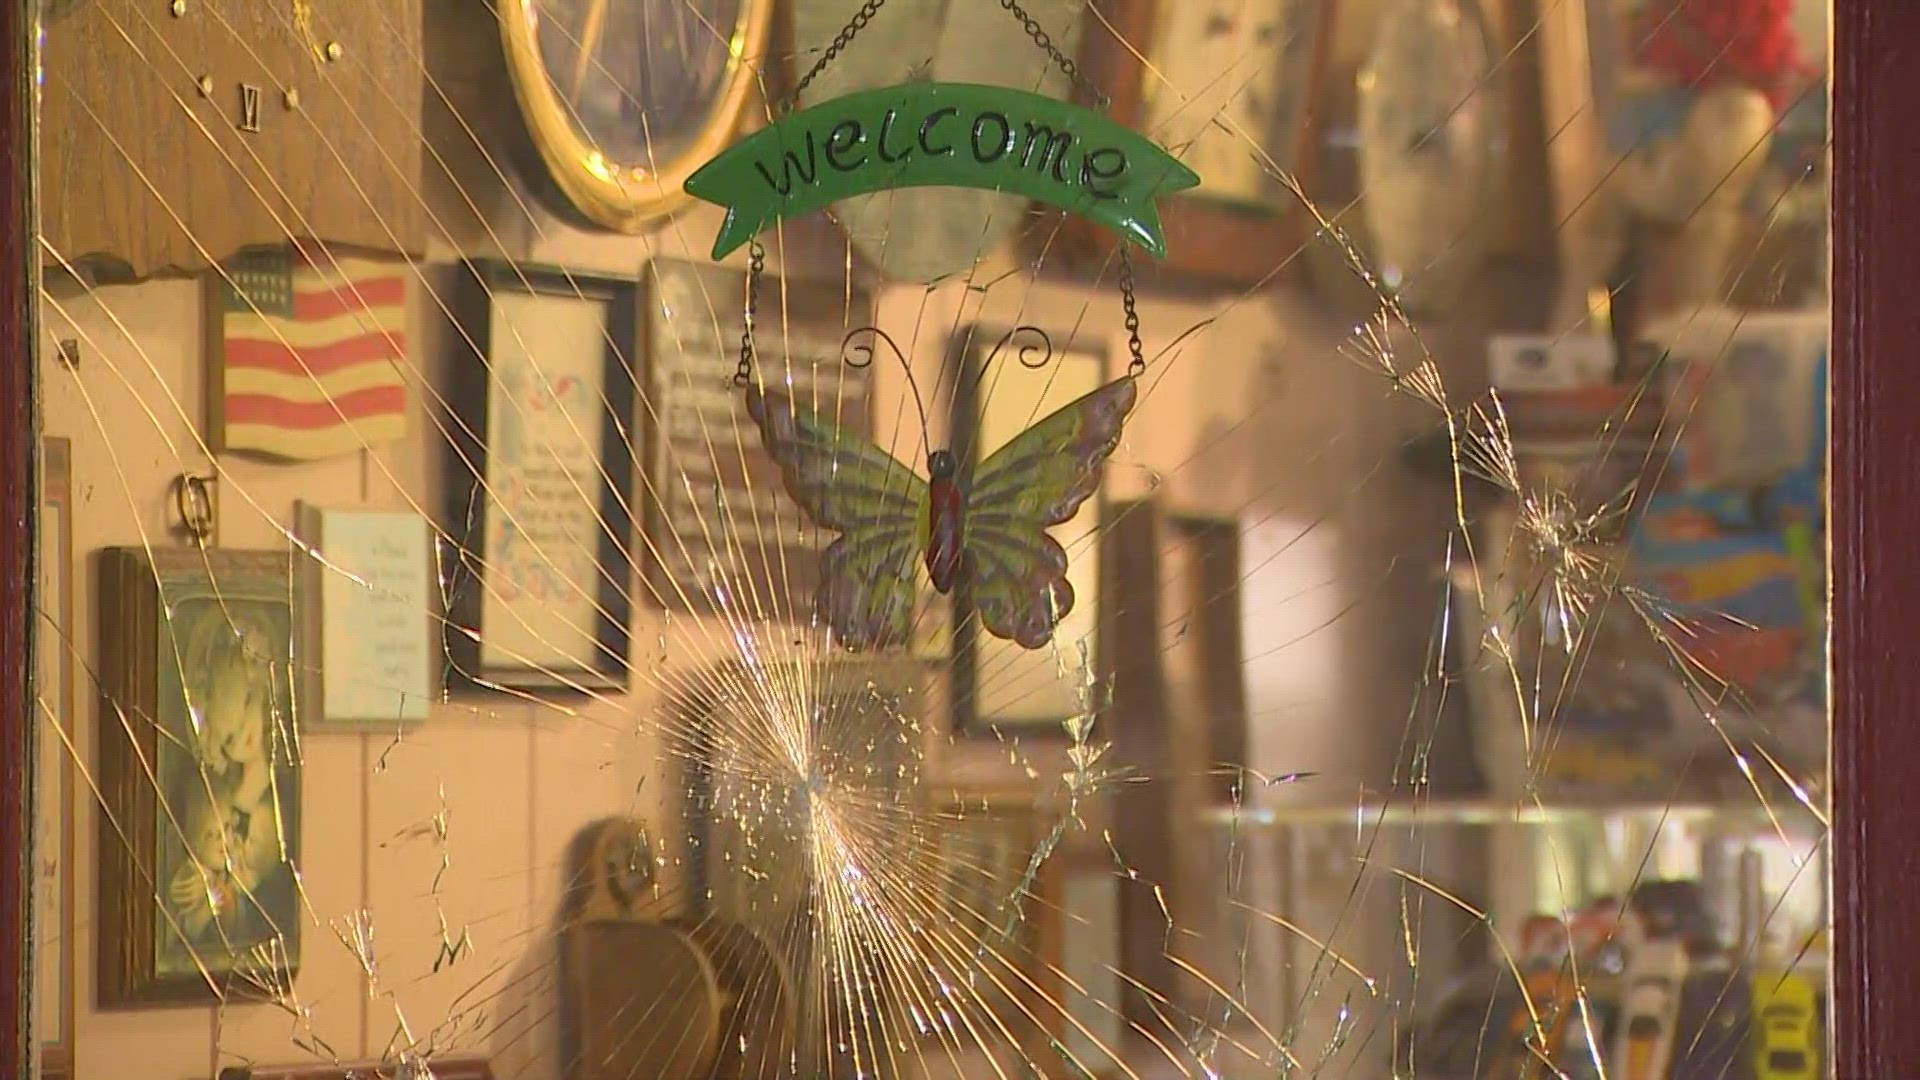 This was not the first time the jewelry store was targeted by burglars.